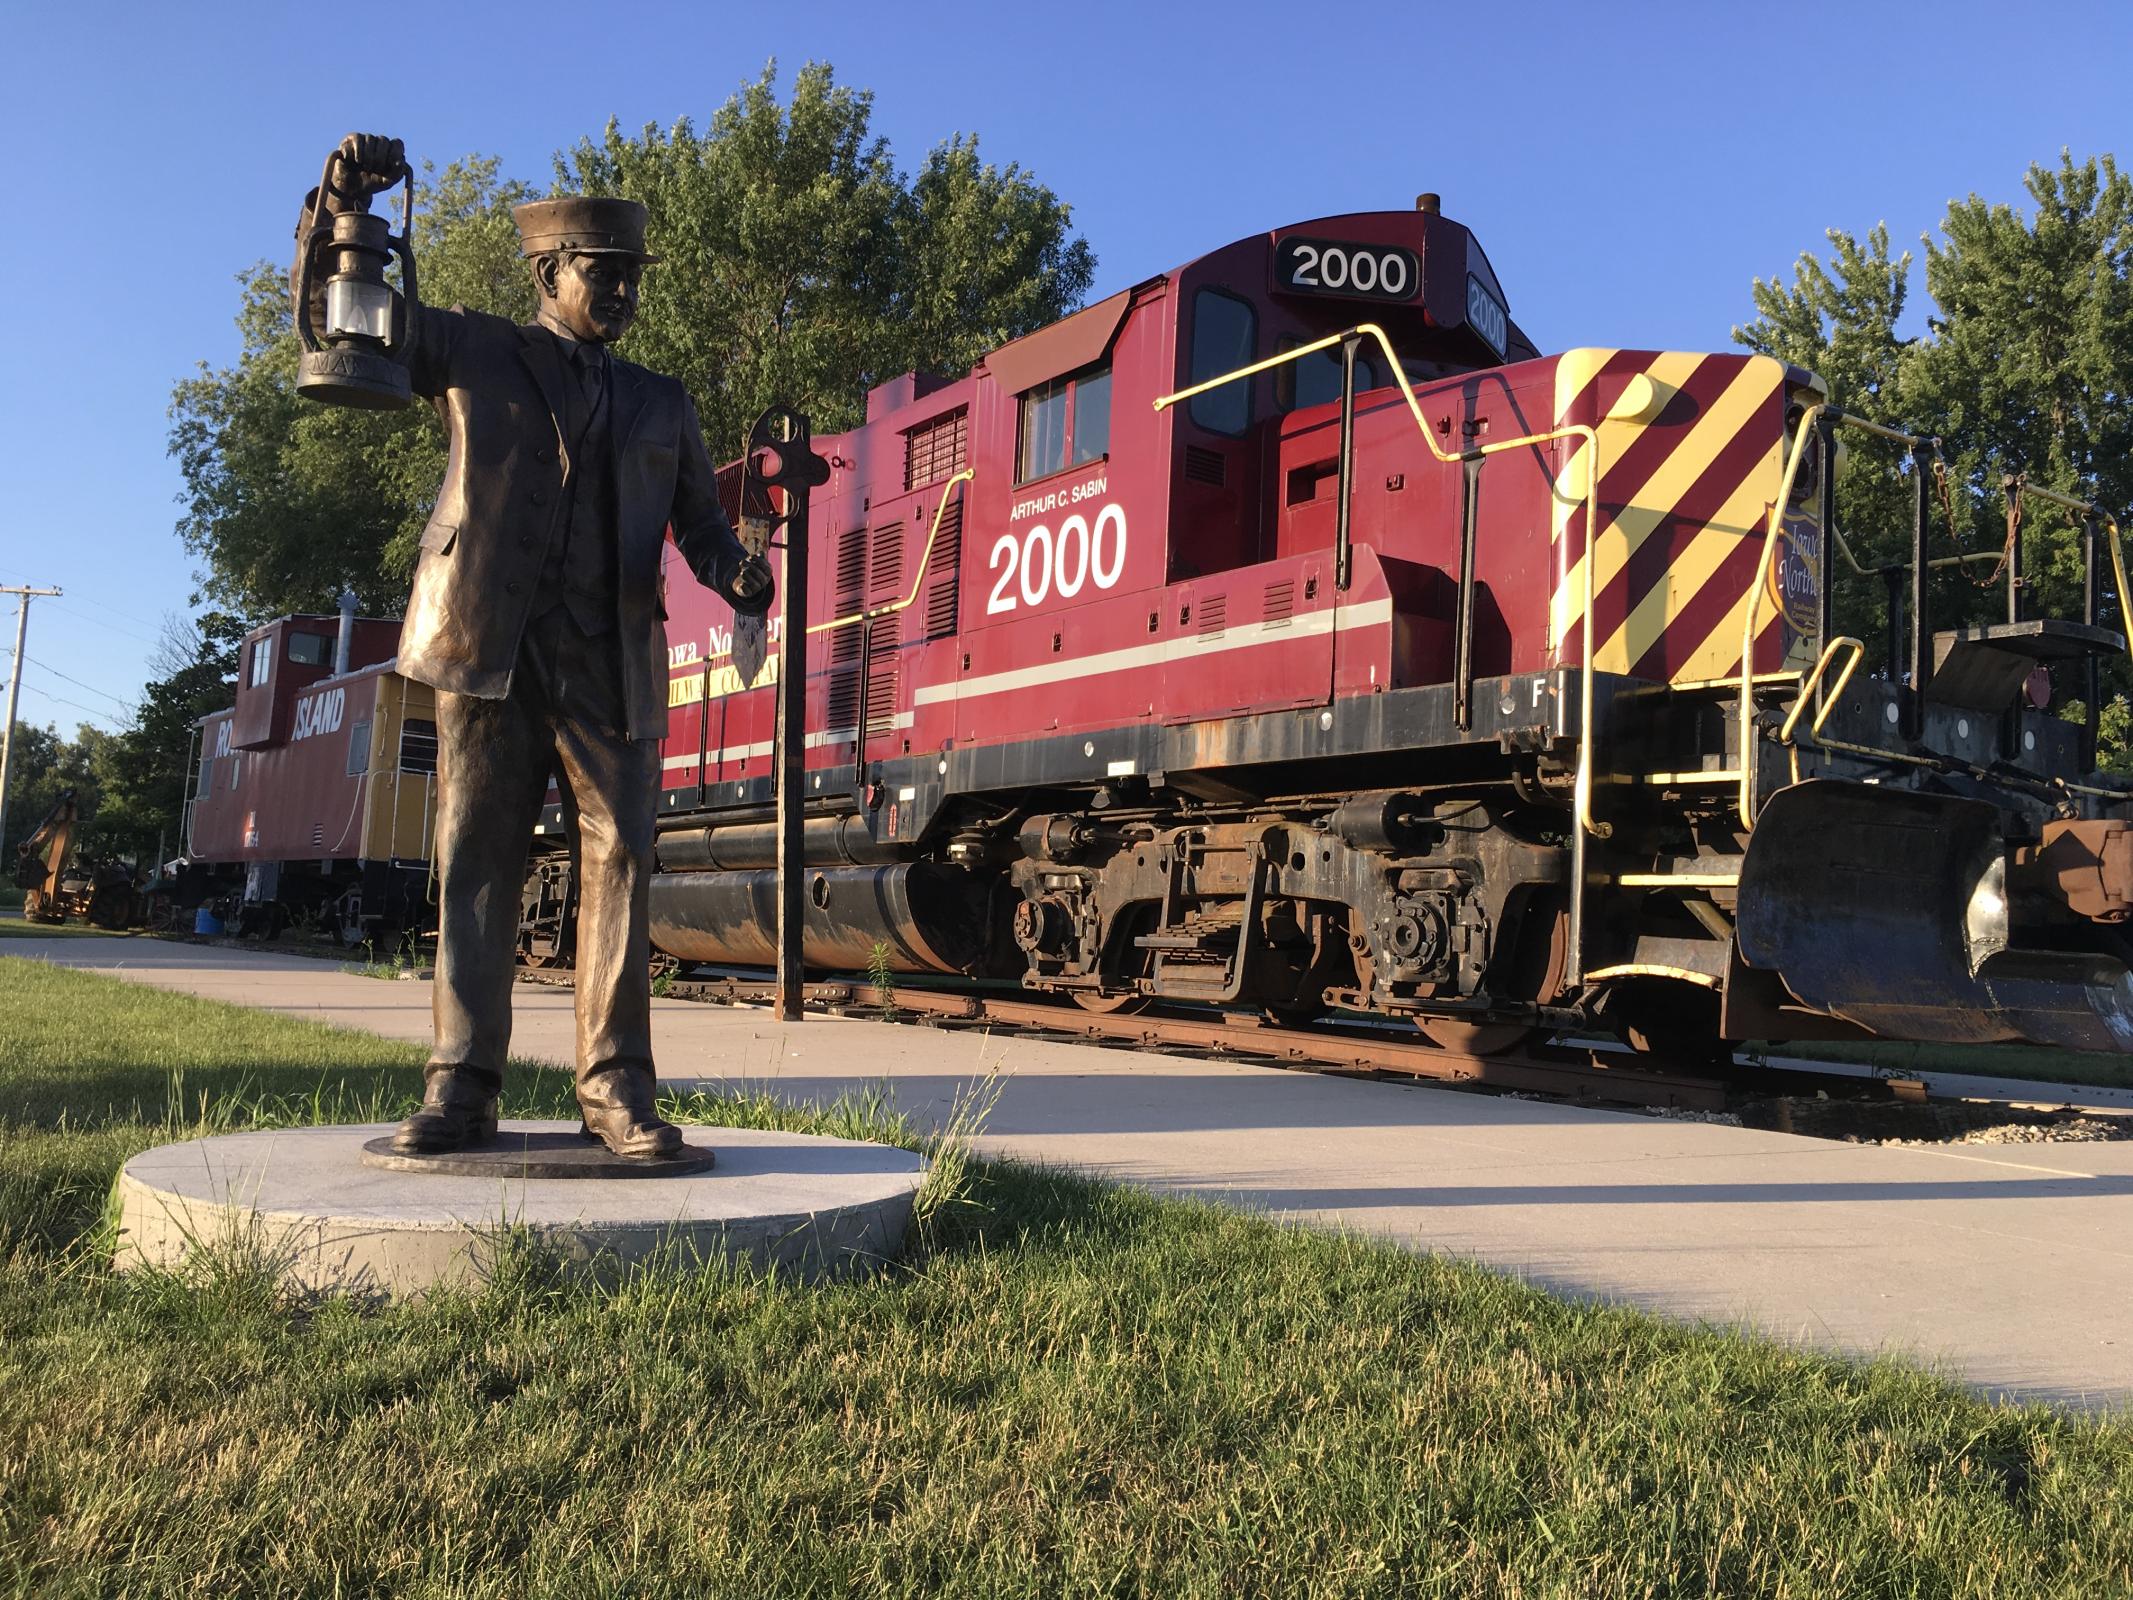 The Caboose Museum Photo